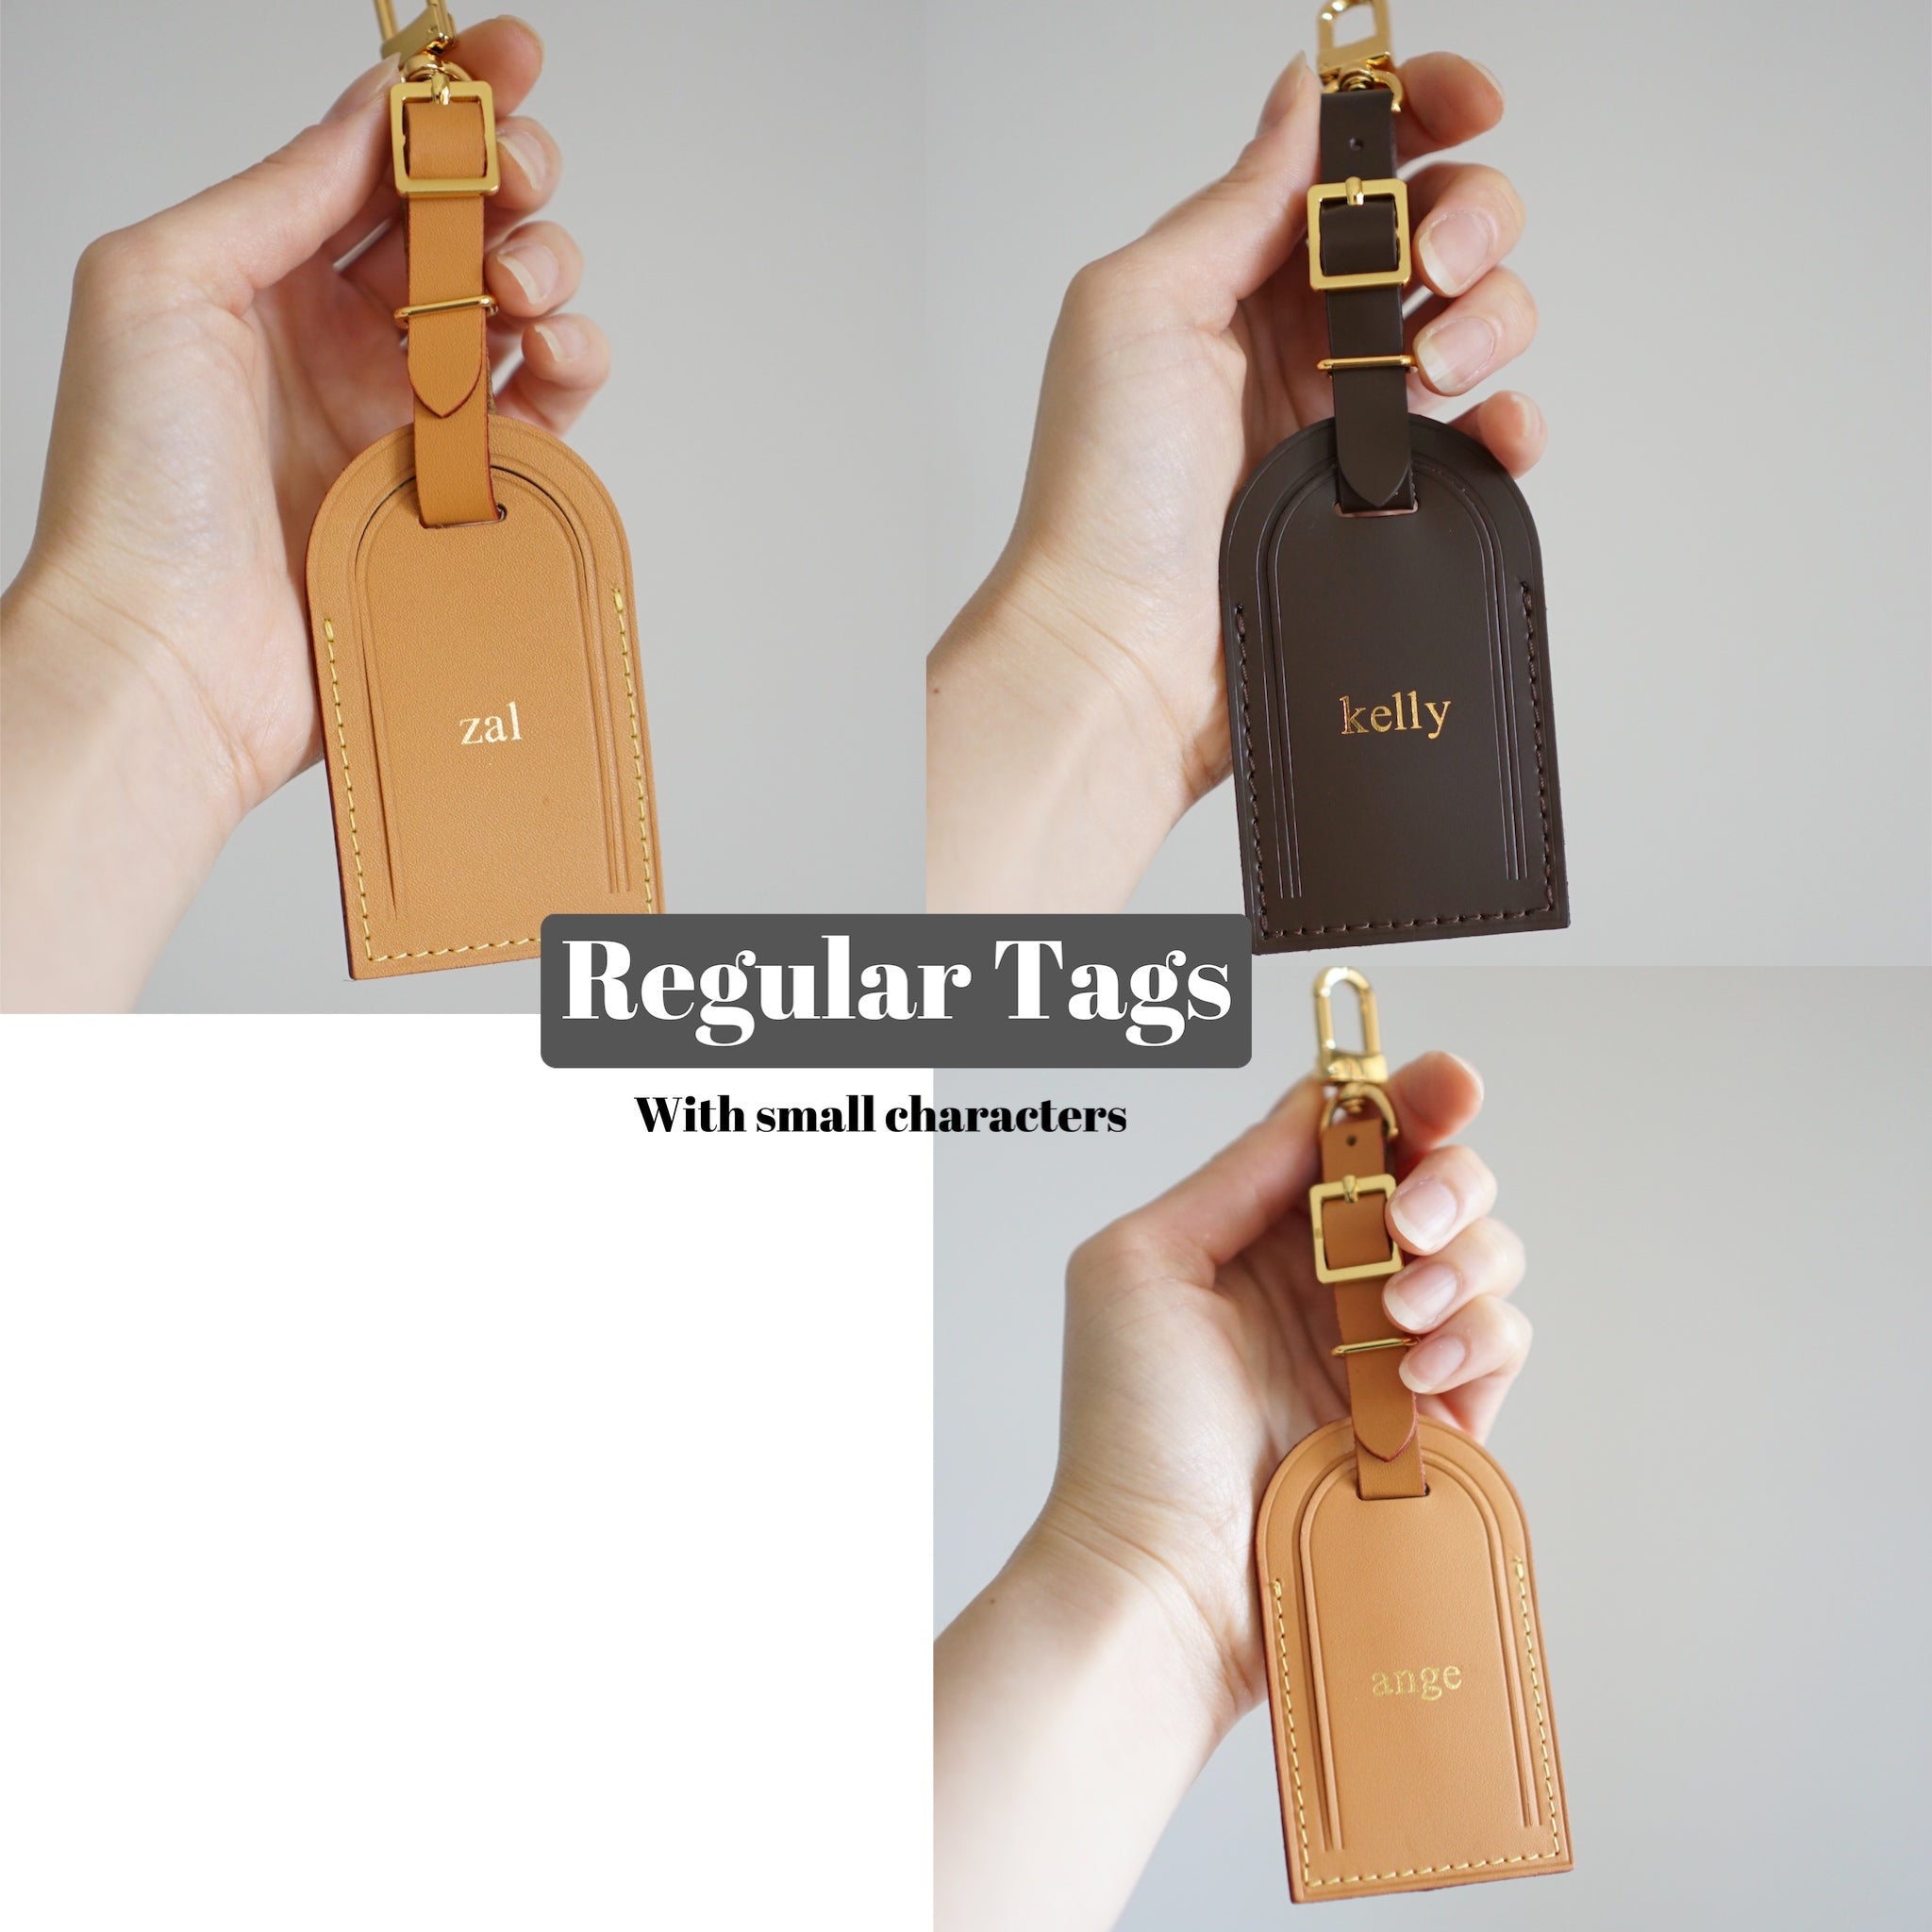 Kathleen – My Louis Vuitton luggage tag collection and locations